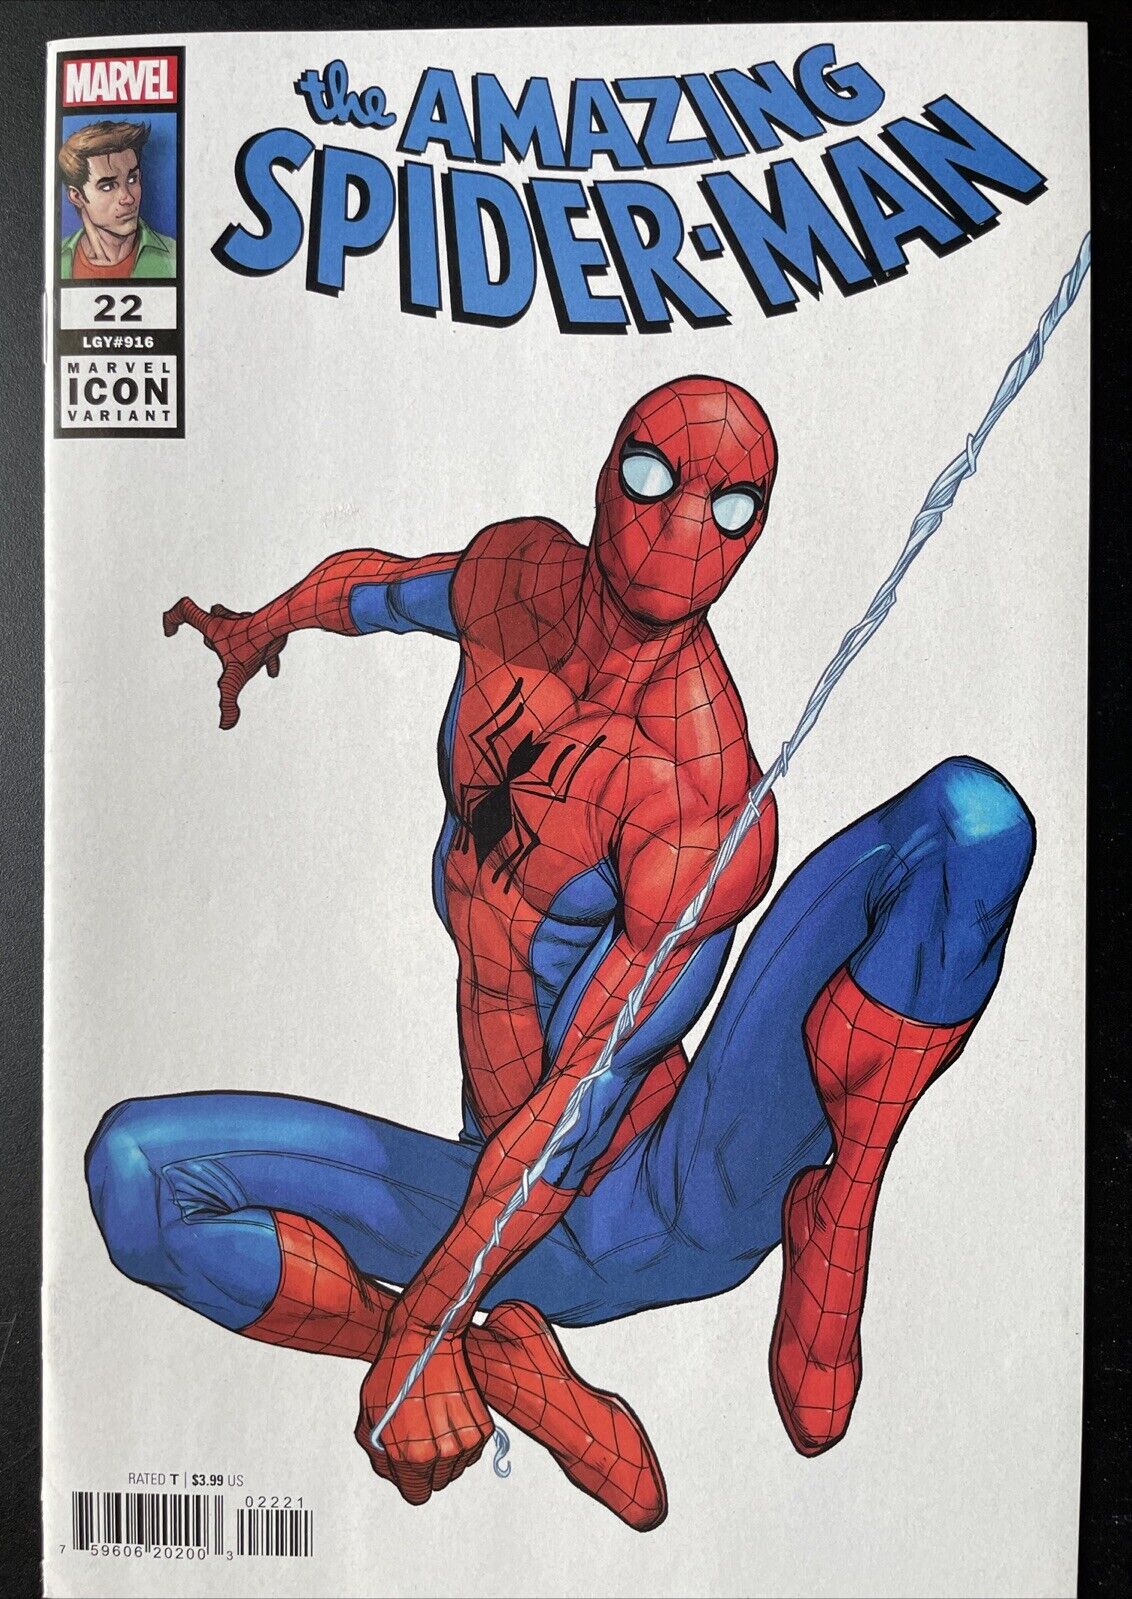 Amazing Spider-Man #22 (Legacy #916) Marvel Icon Variant Cover